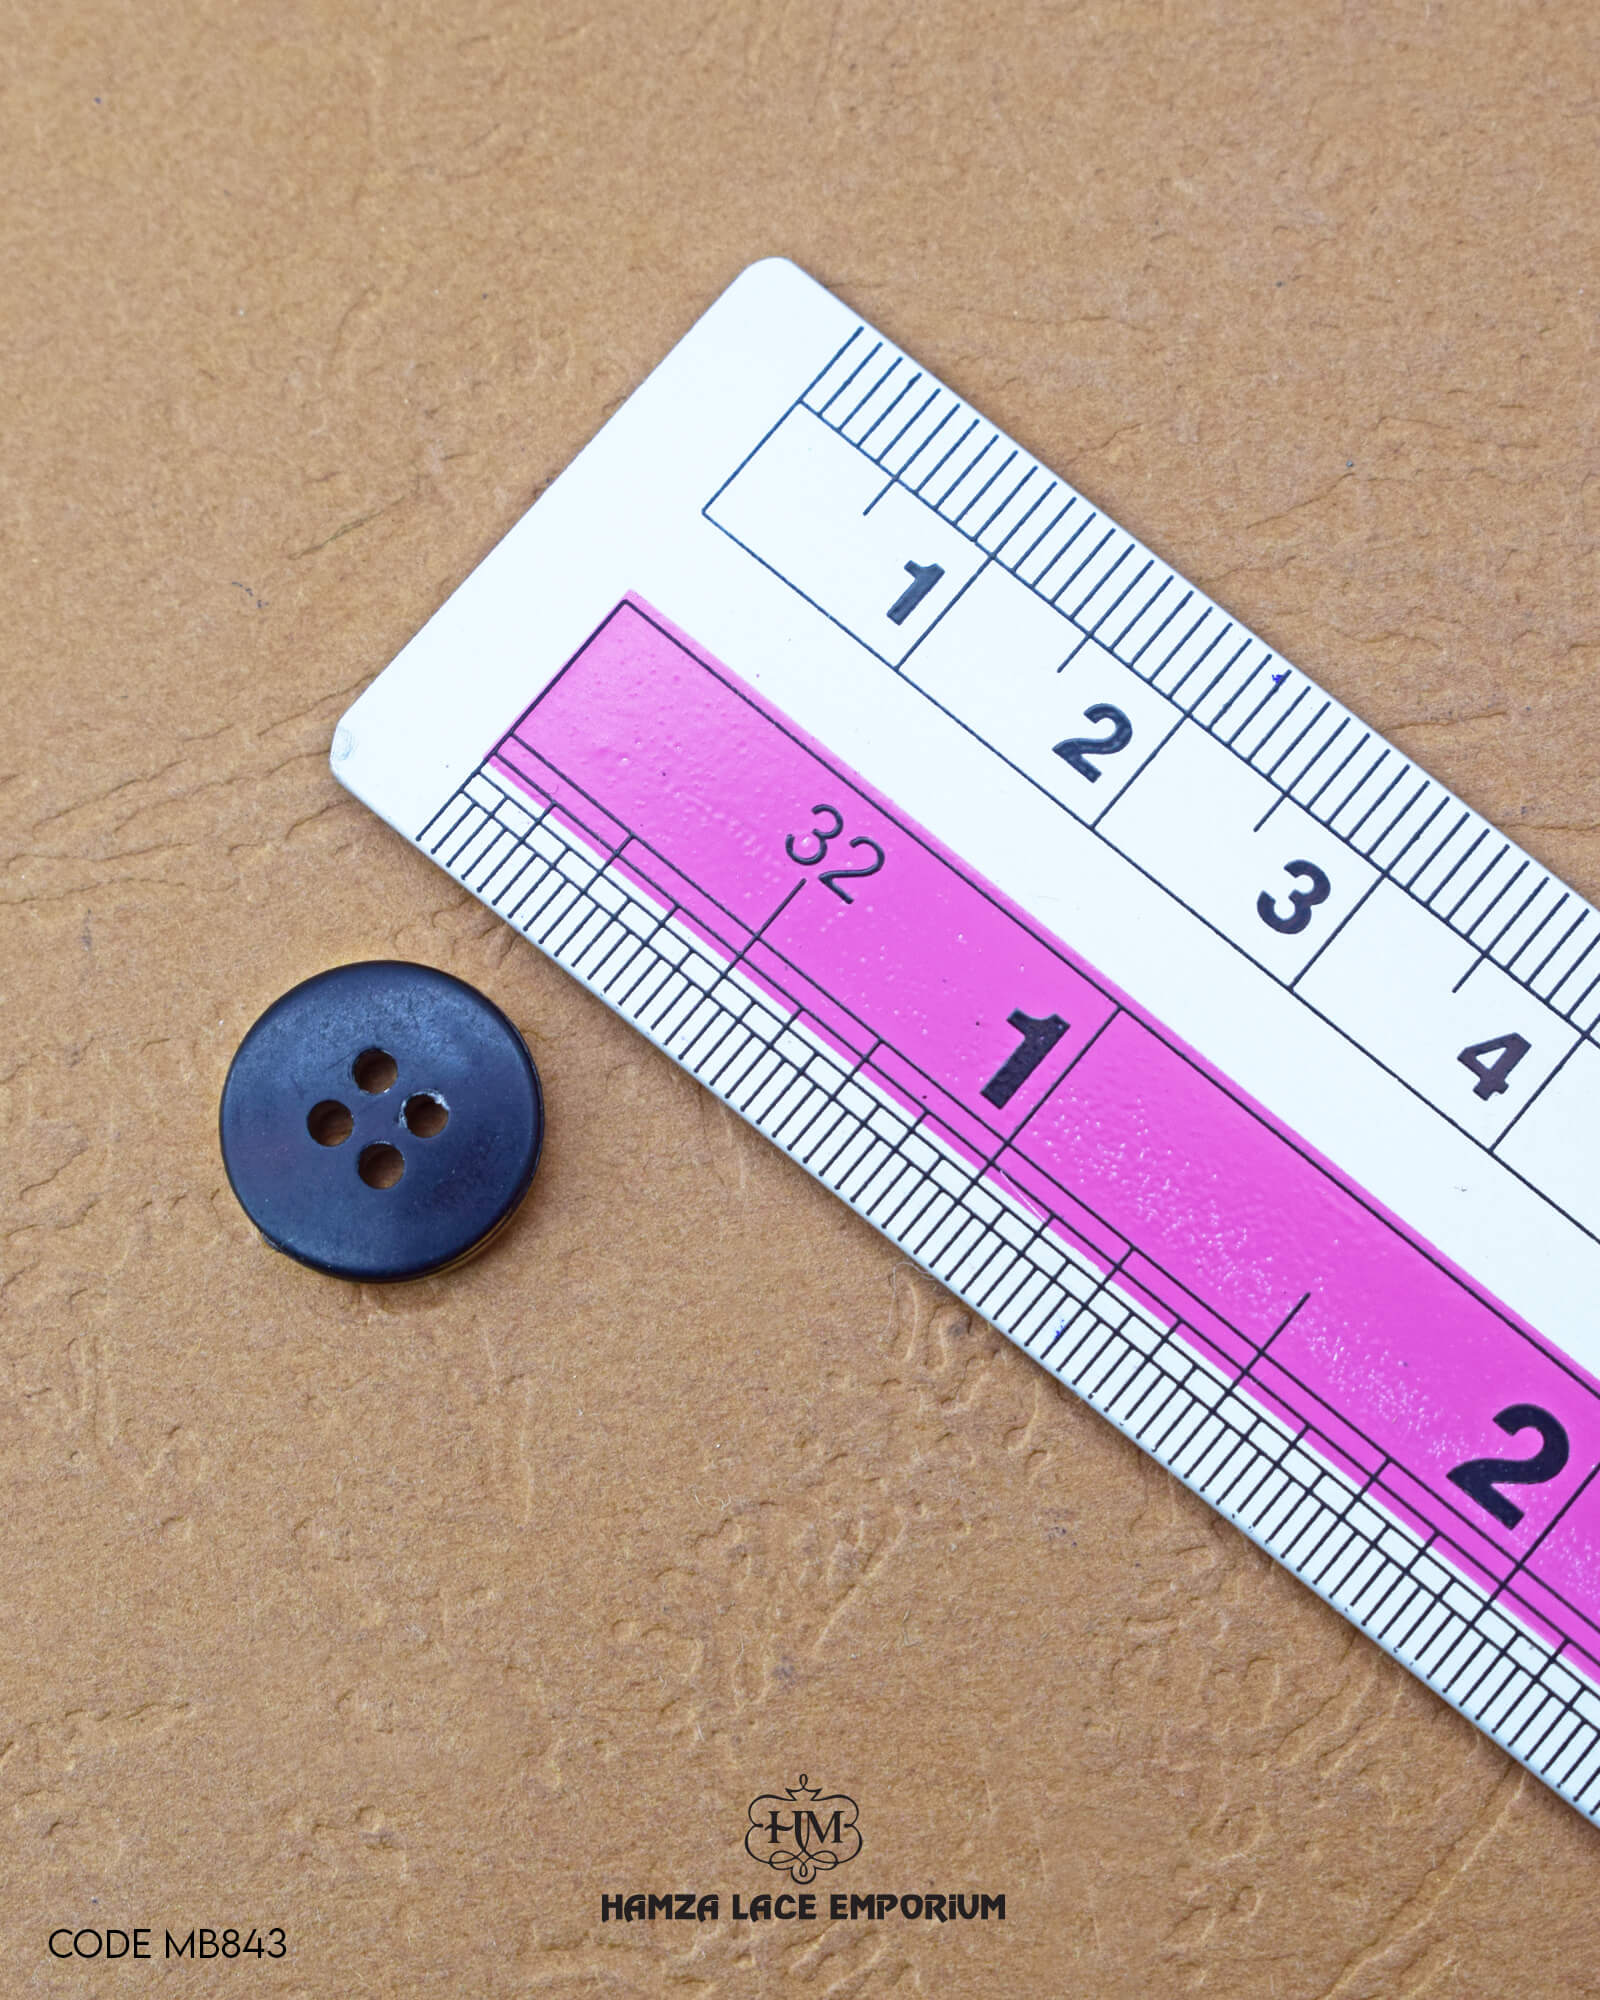 The dimensions of the 'Four Hole Golden Metal Button' are determined using a ruler.